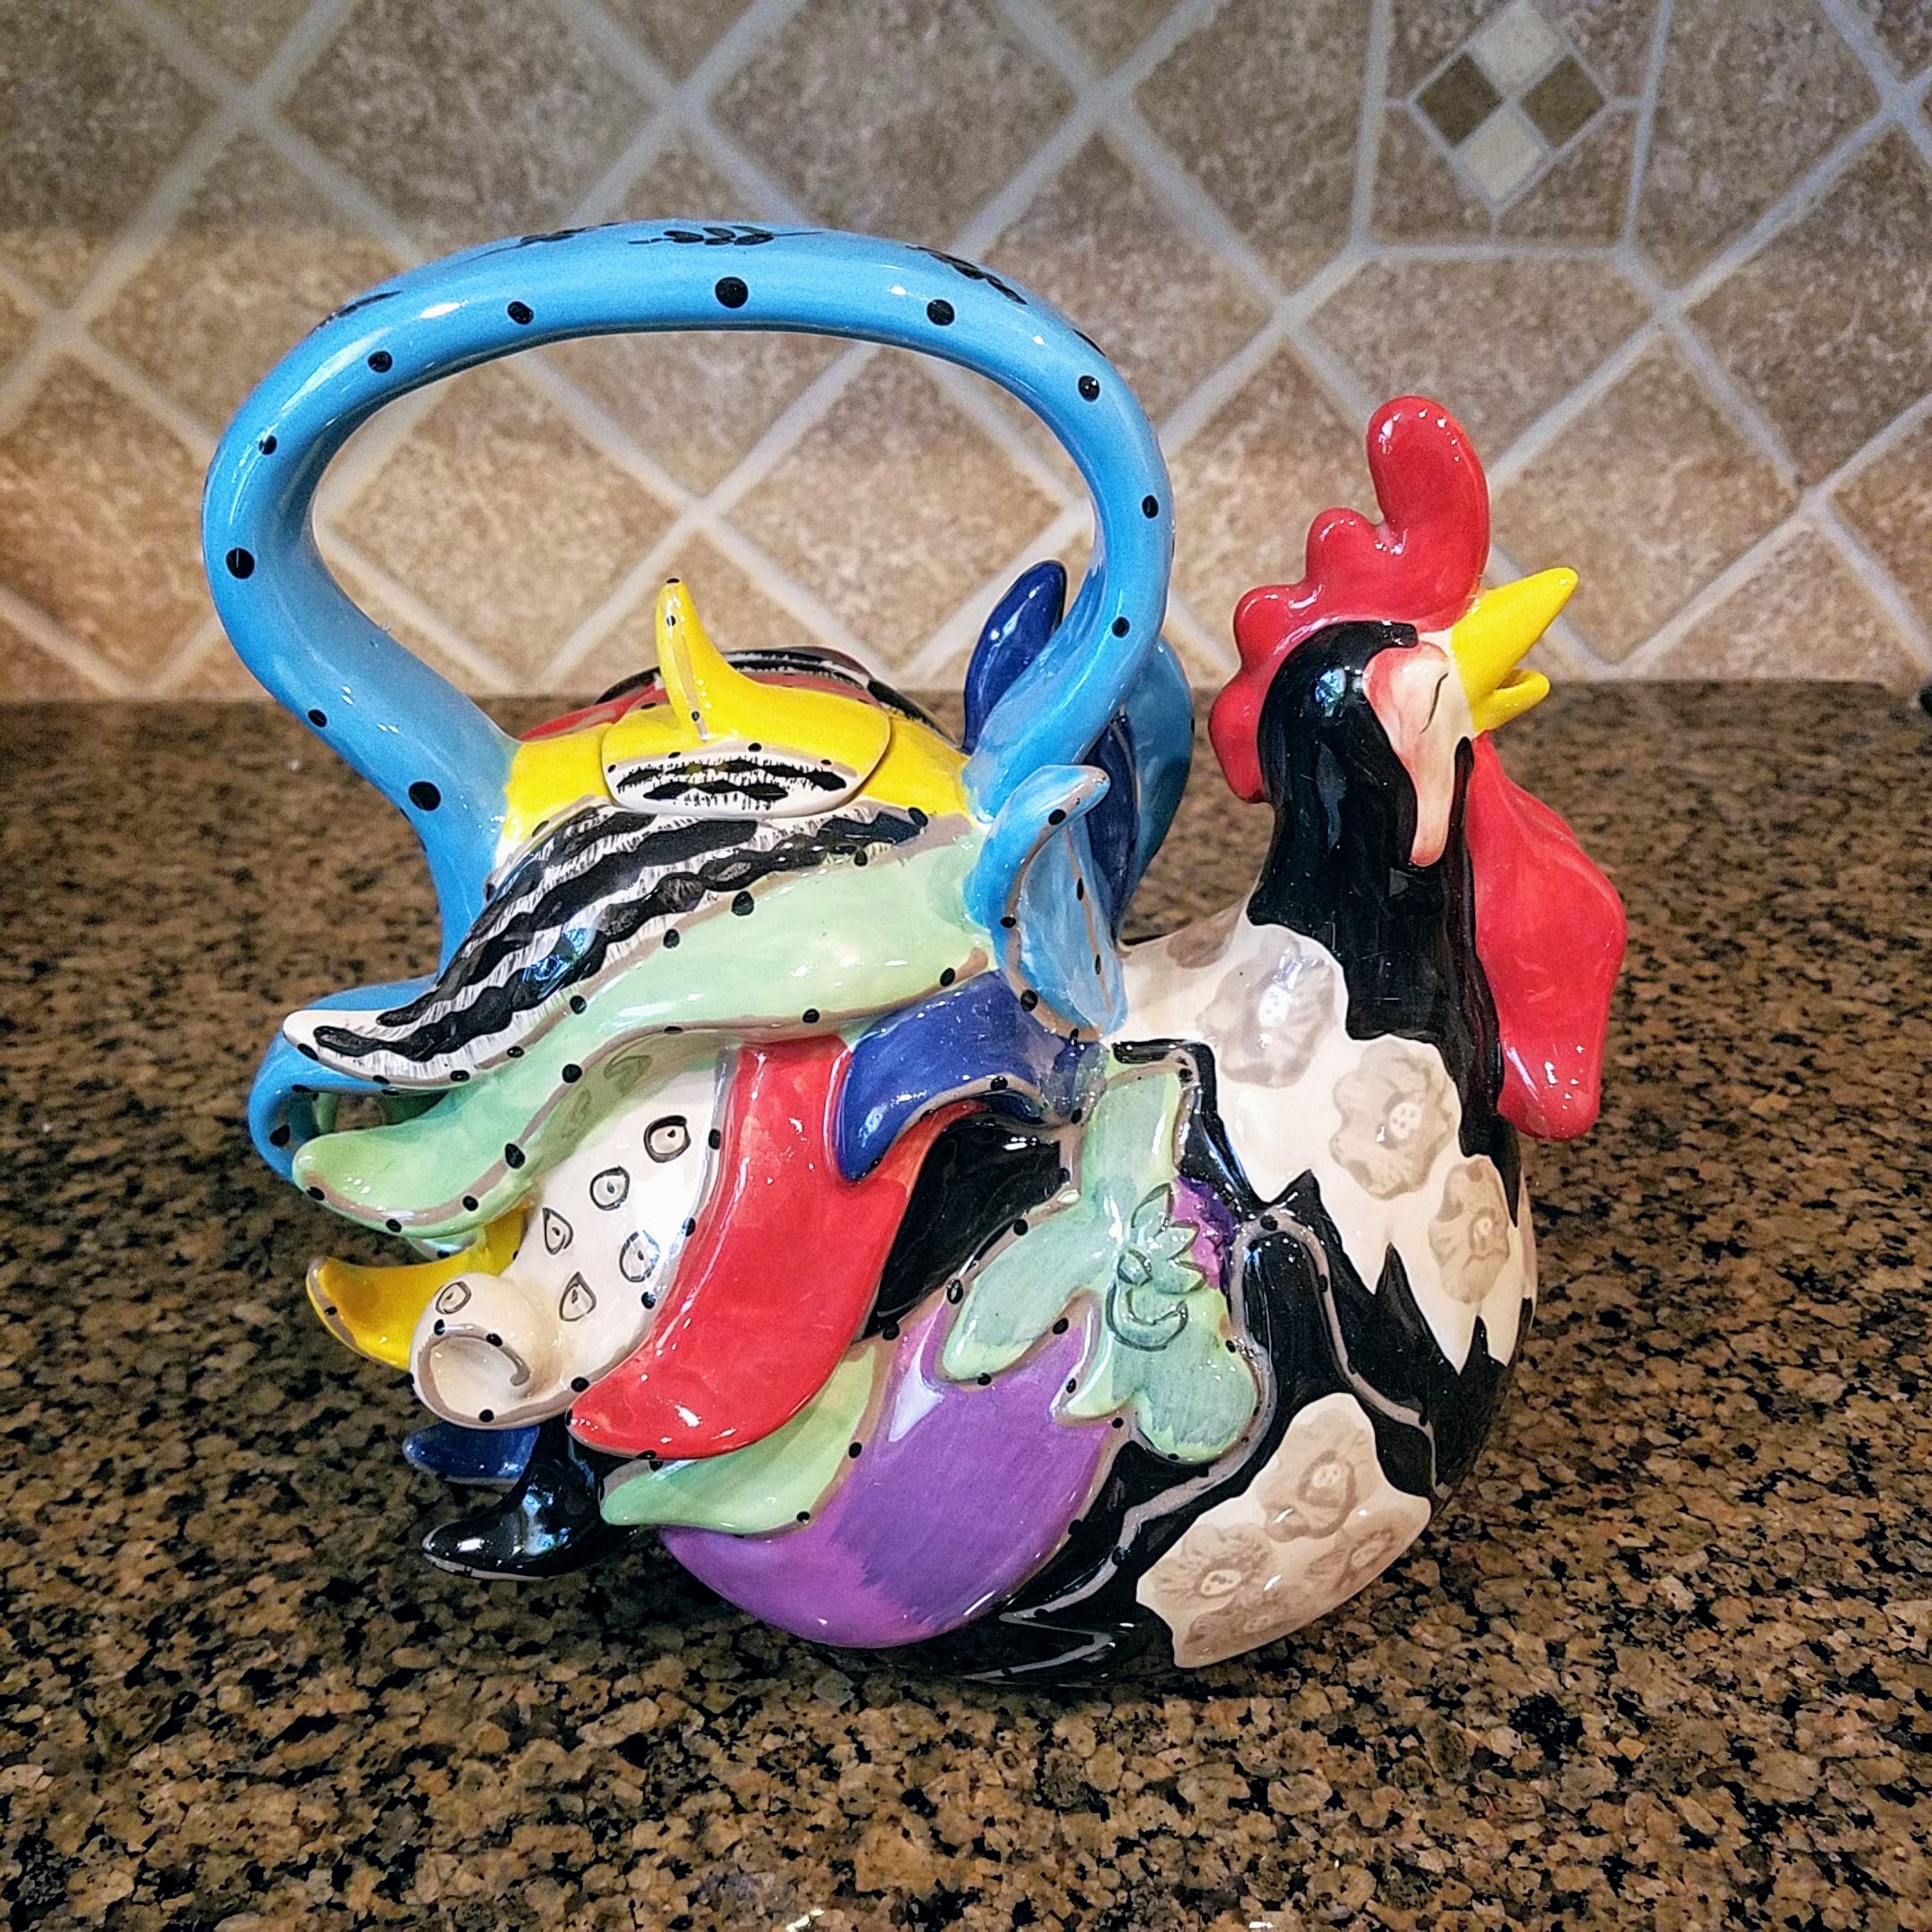 This Rooster Ceramic Teapot Decorative Kitchen Decor New Blue Sky Heather Goldminc is made with love by Premier Homegoods! Shop more unique gift ideas today with Spots Initiatives, the best way to support creators.